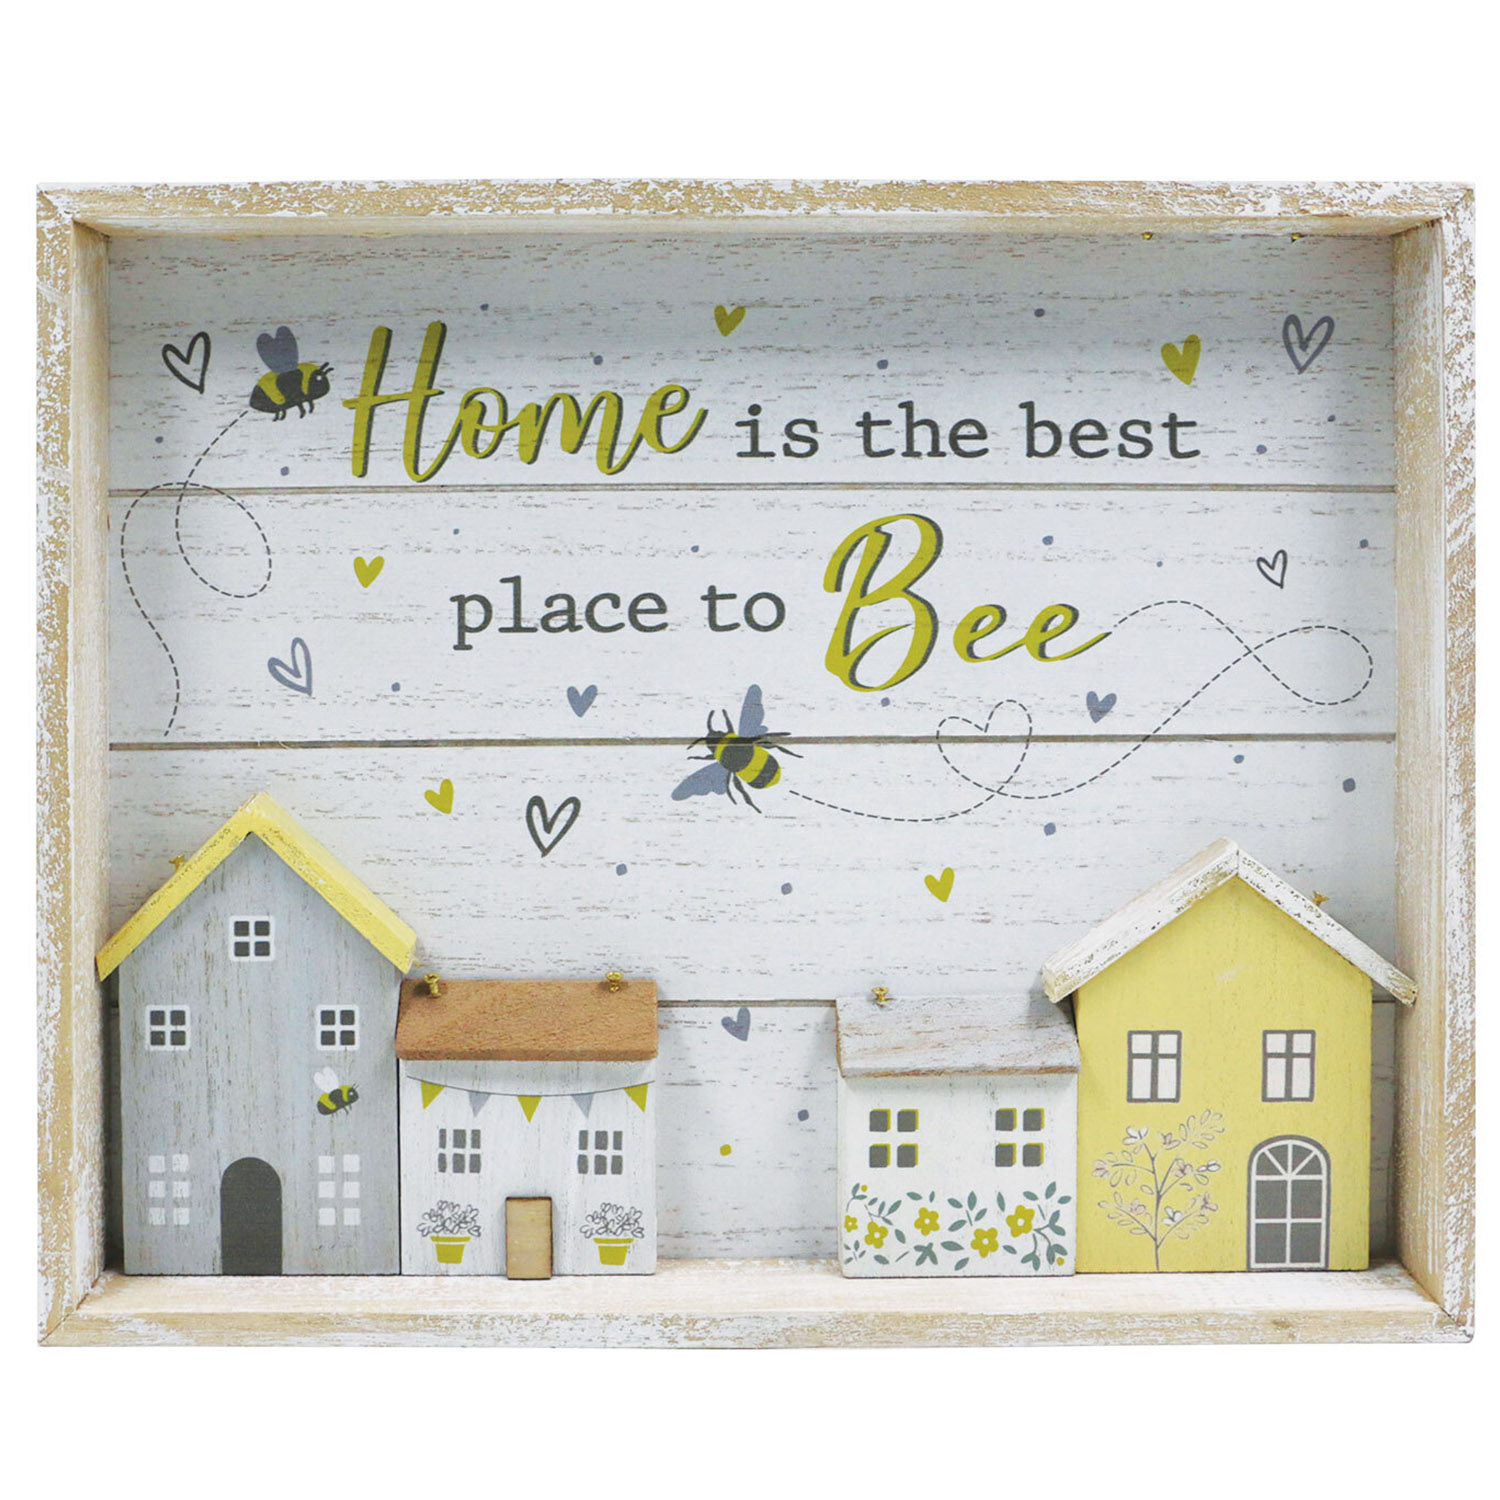 Home is the Best Place to Bee Wall Plaque Image